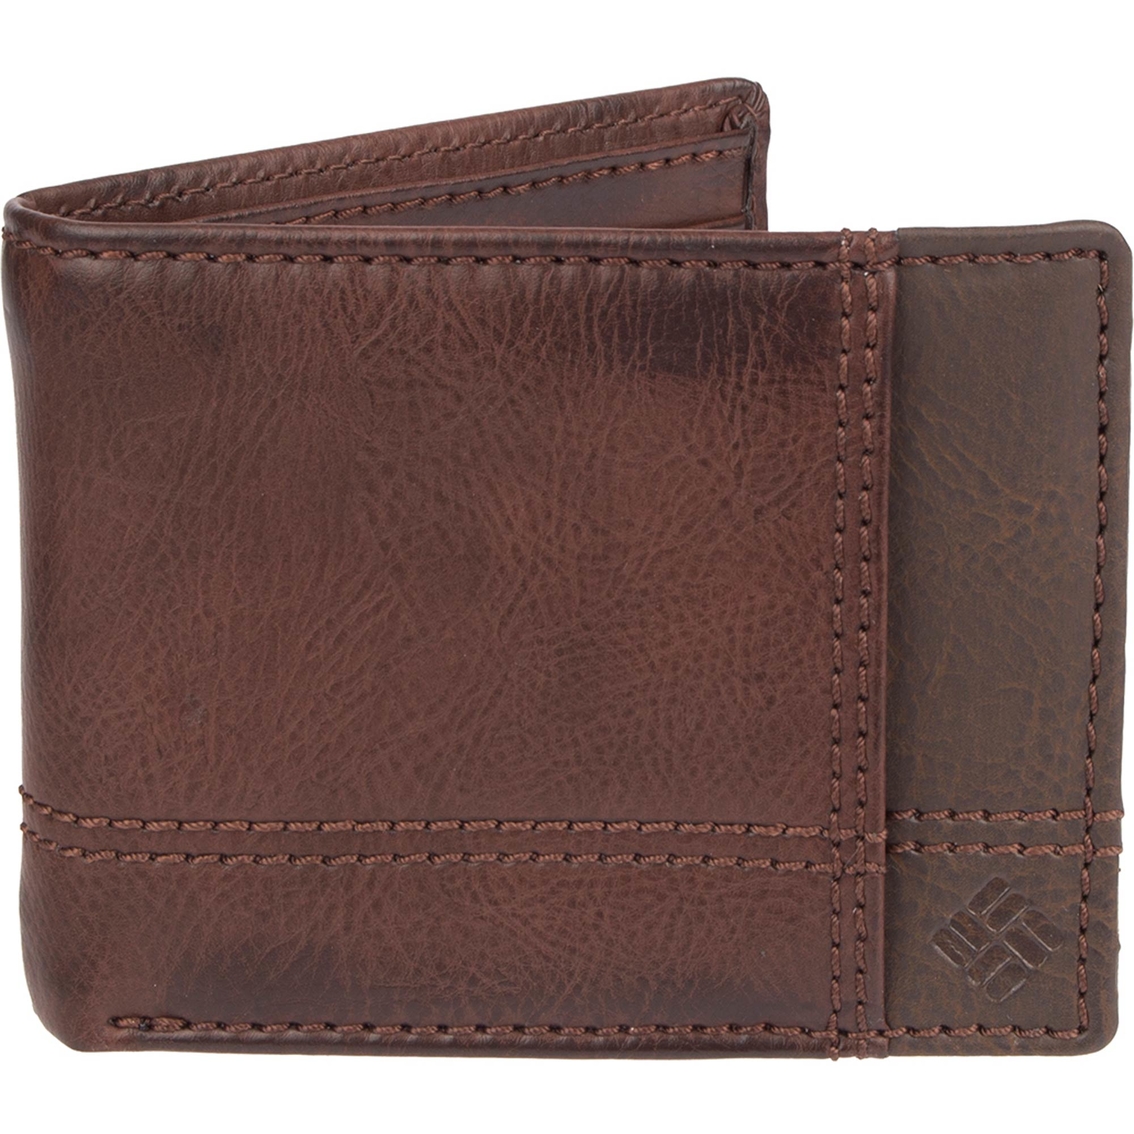 Columbia Rfid Traveler Wallet | Wallets | Clothing & Accessories | Shop ...